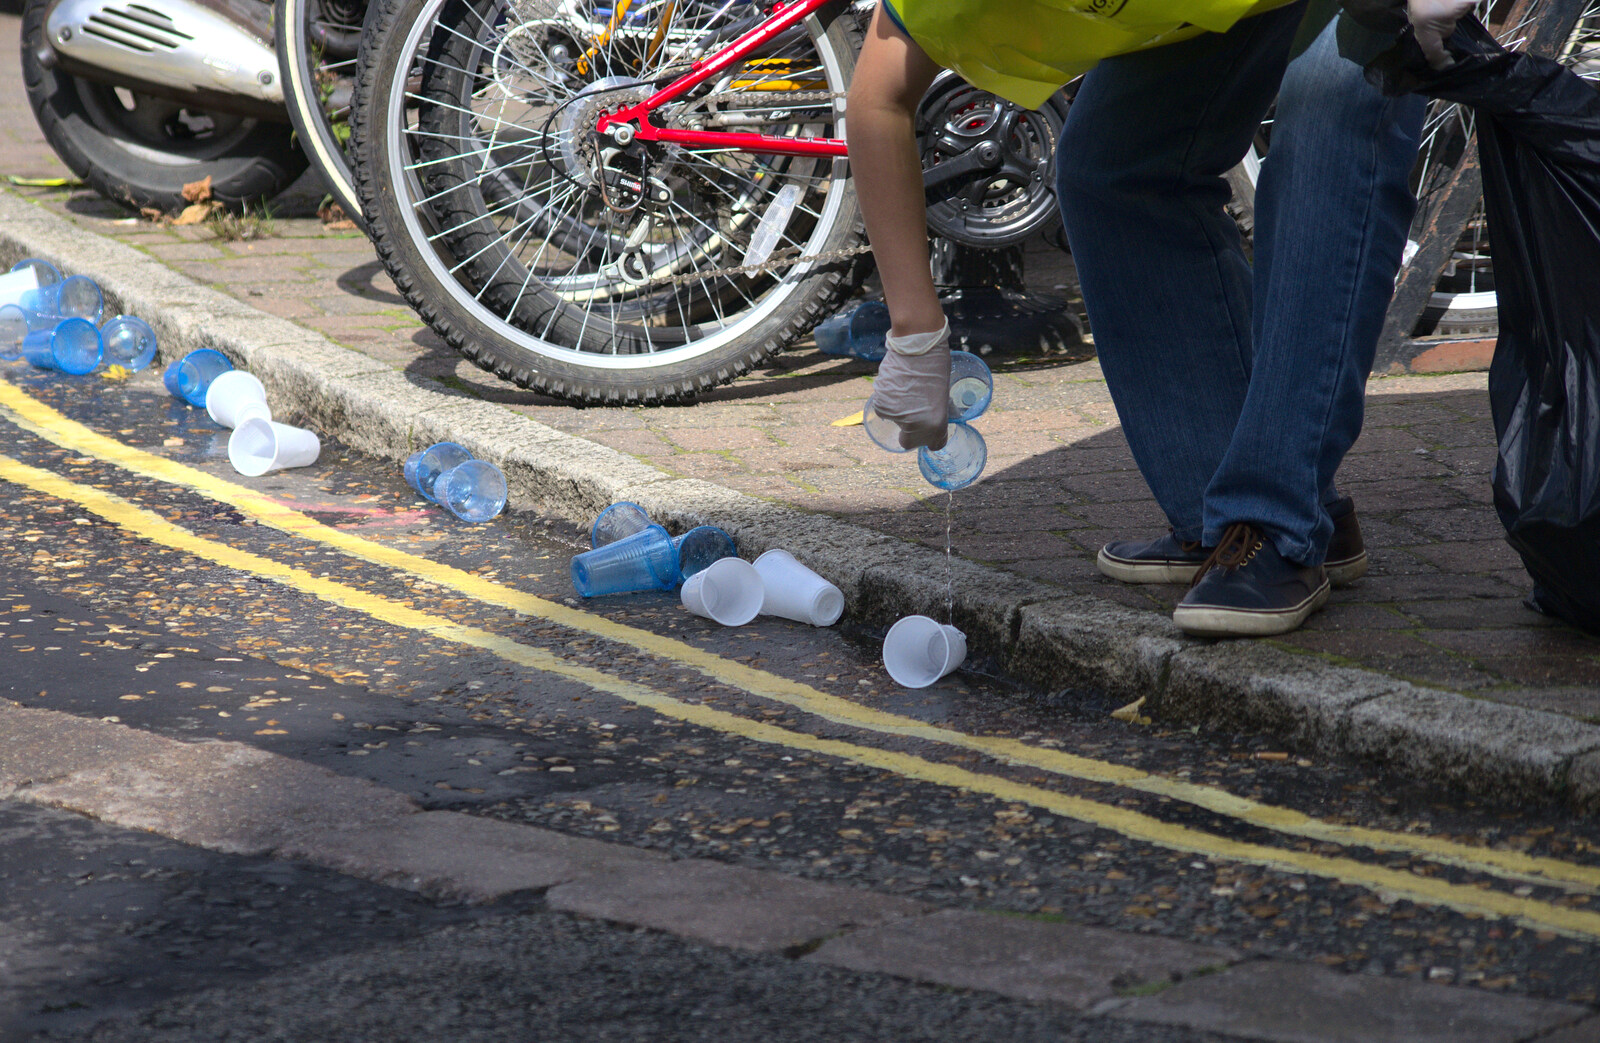 Discarded plastic cups are picked up from The Framlingham 10k Run, Suffolk - 31st August 2014